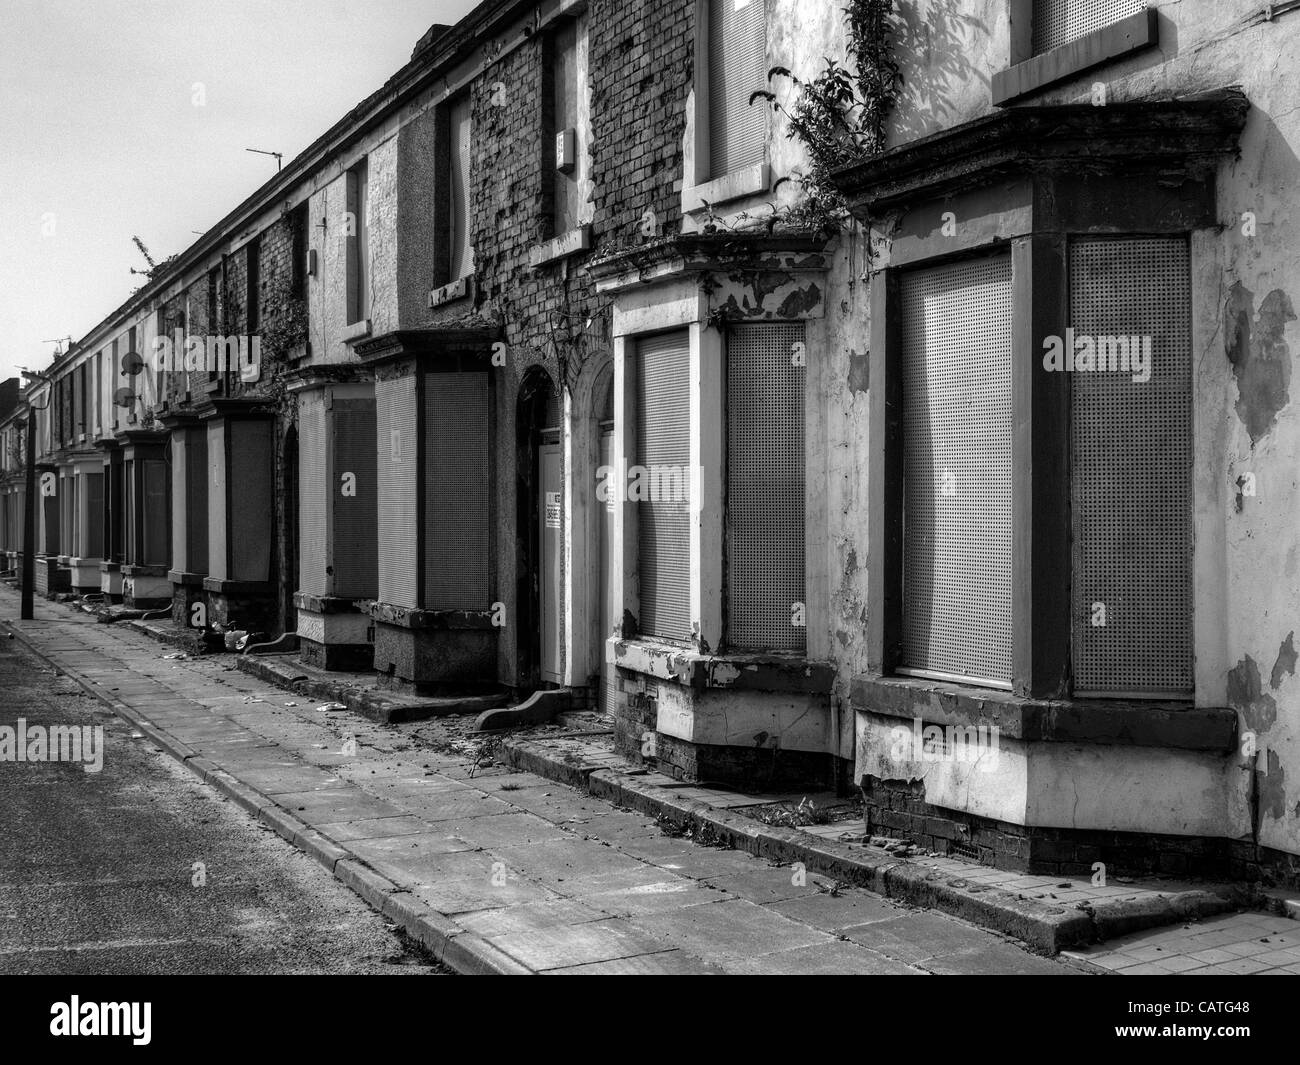 Abandoned Liverpool city terrace house street prior to regeneration program to make way for new housing development Stock Photo